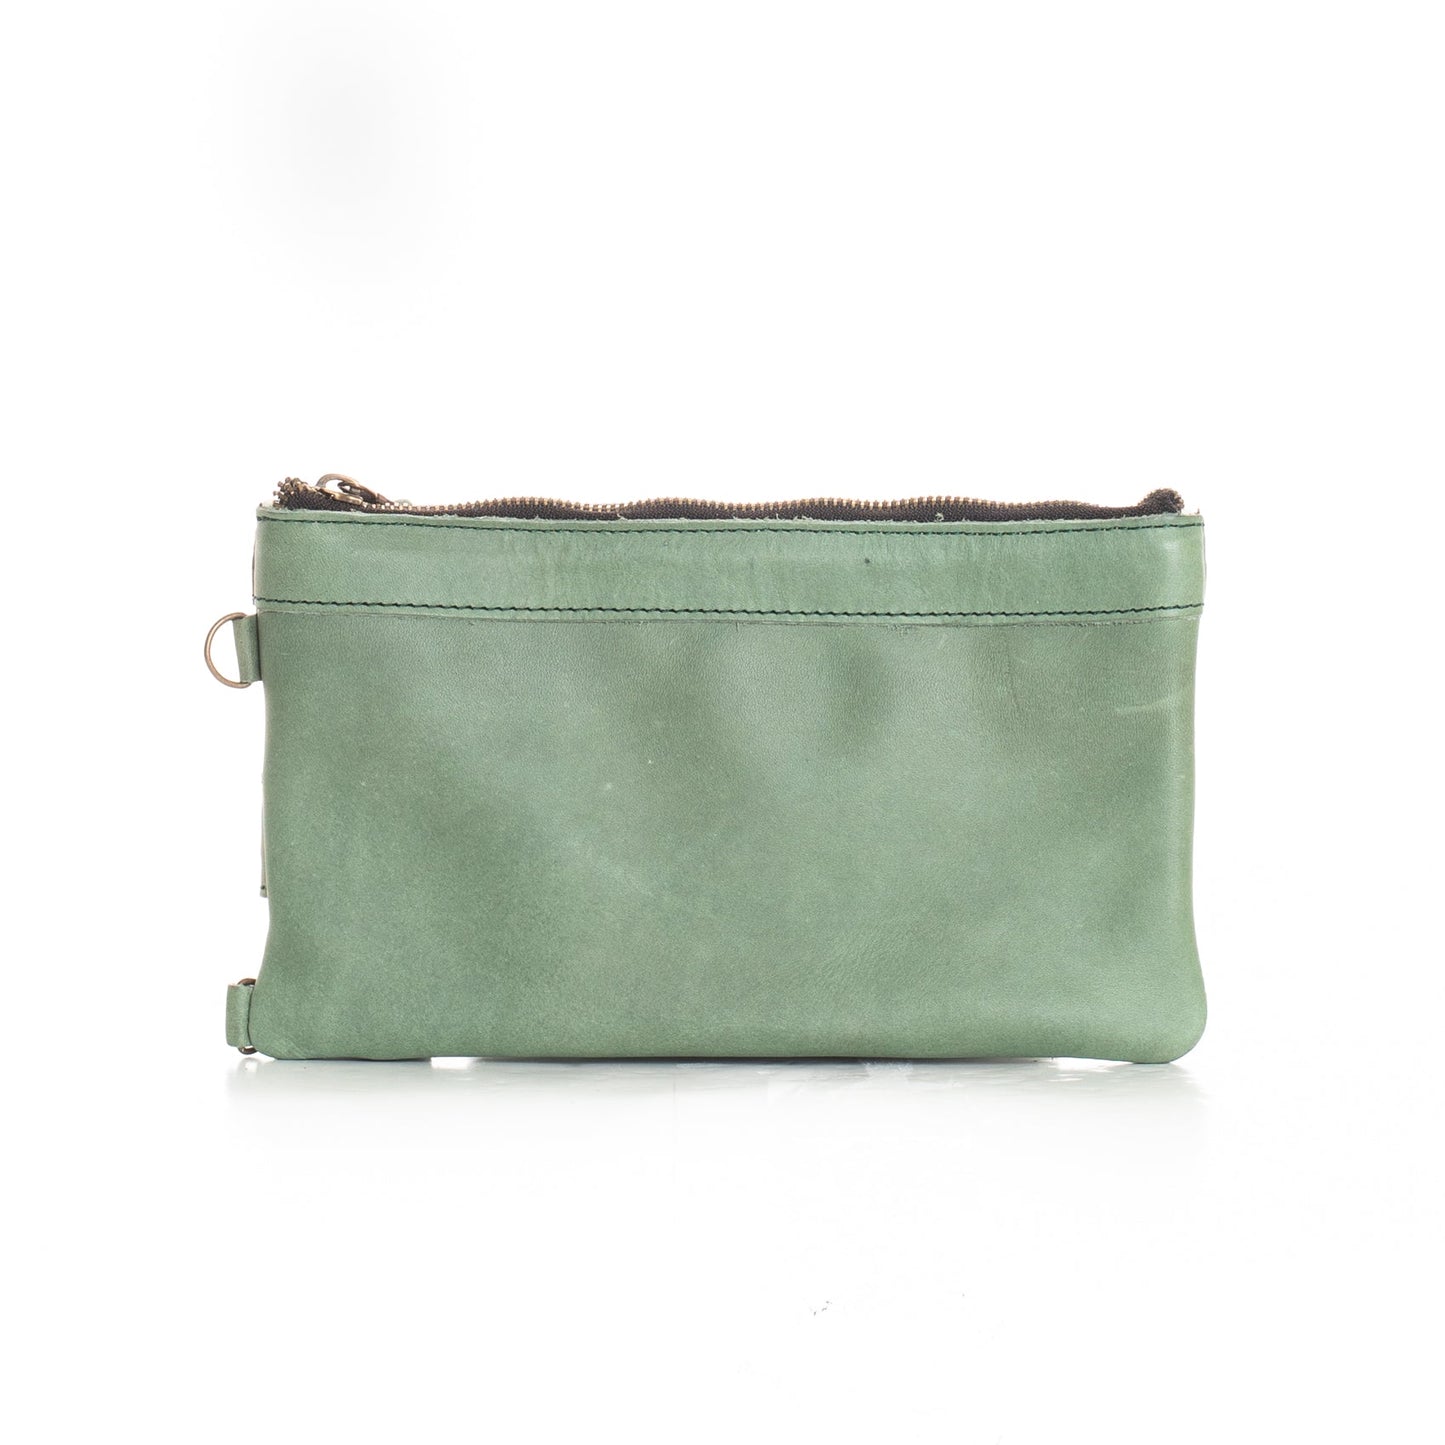 EVERYTHING CLUTCH - MEXICO COLLECTION - FULL LEATHER - JADE